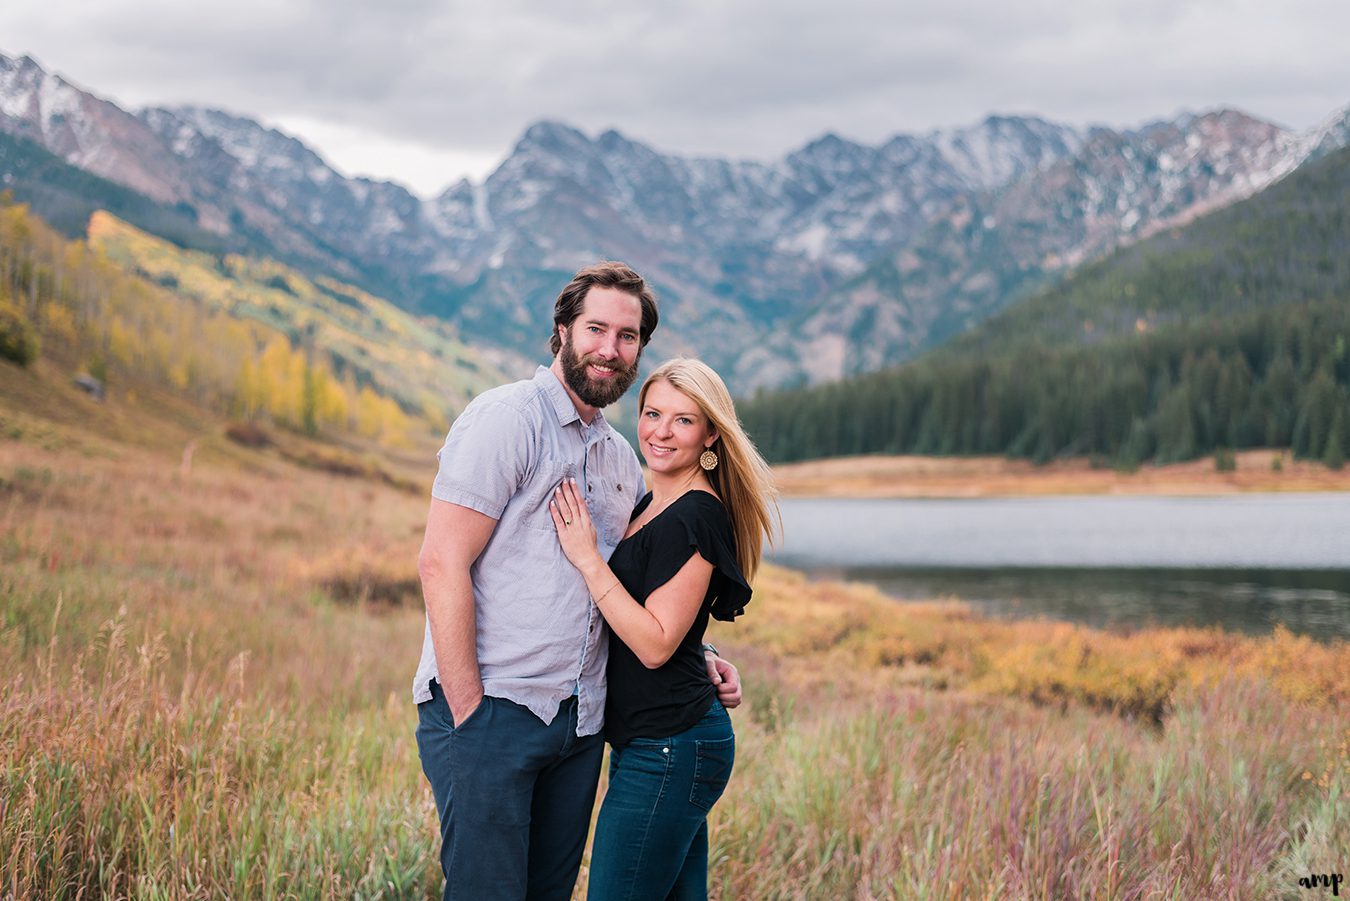 Engagement photo at Piney River Ranch in Vail